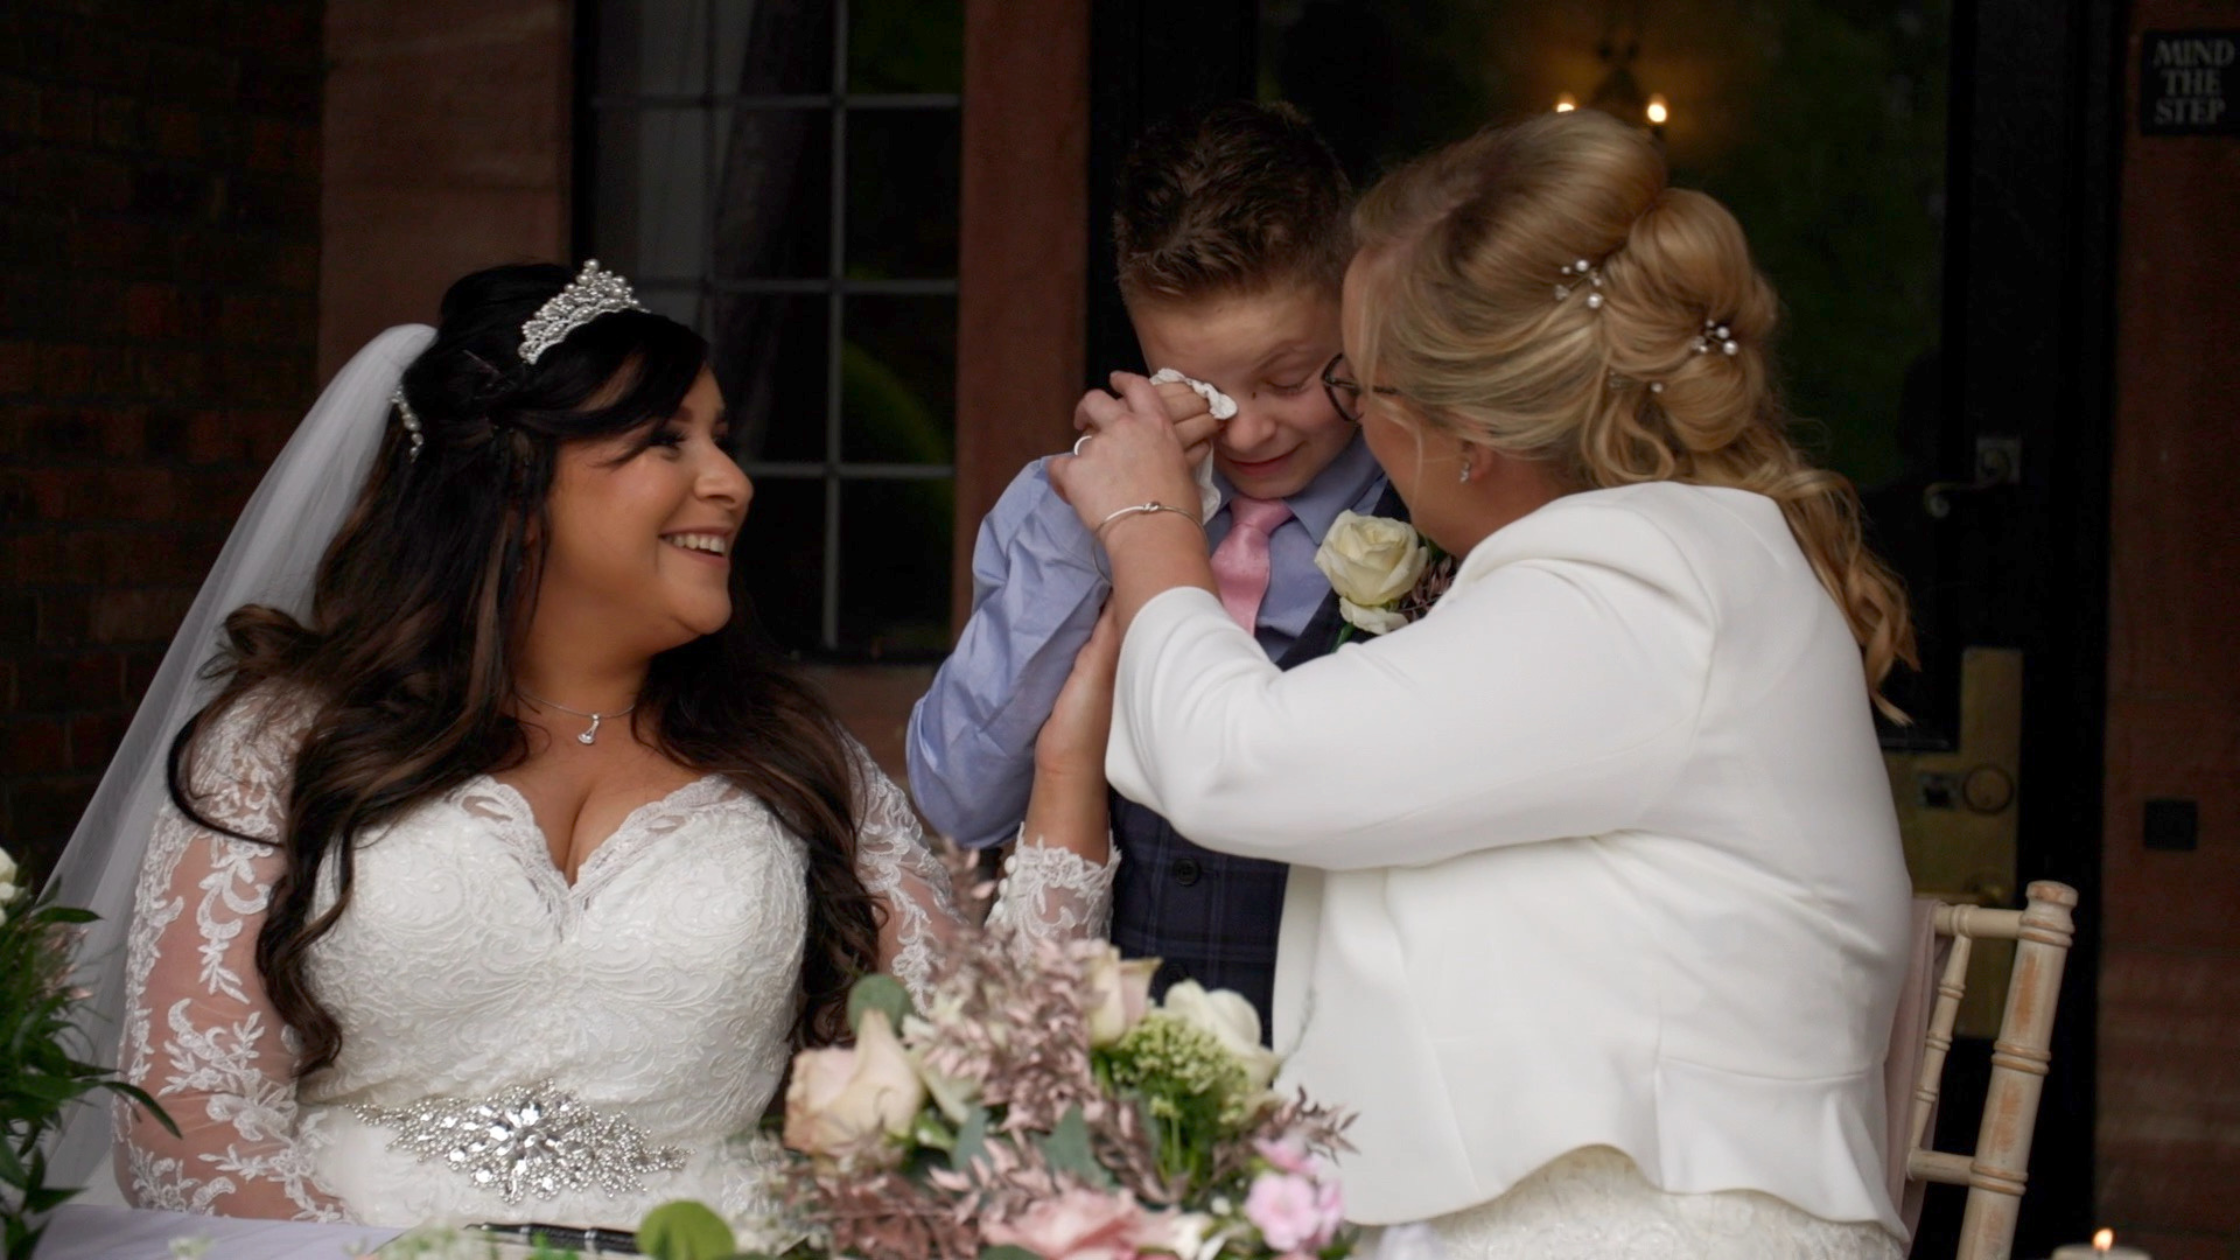 Image shows brides Sheryl and Jodie, with their son who is emotionally crying on their wedding day